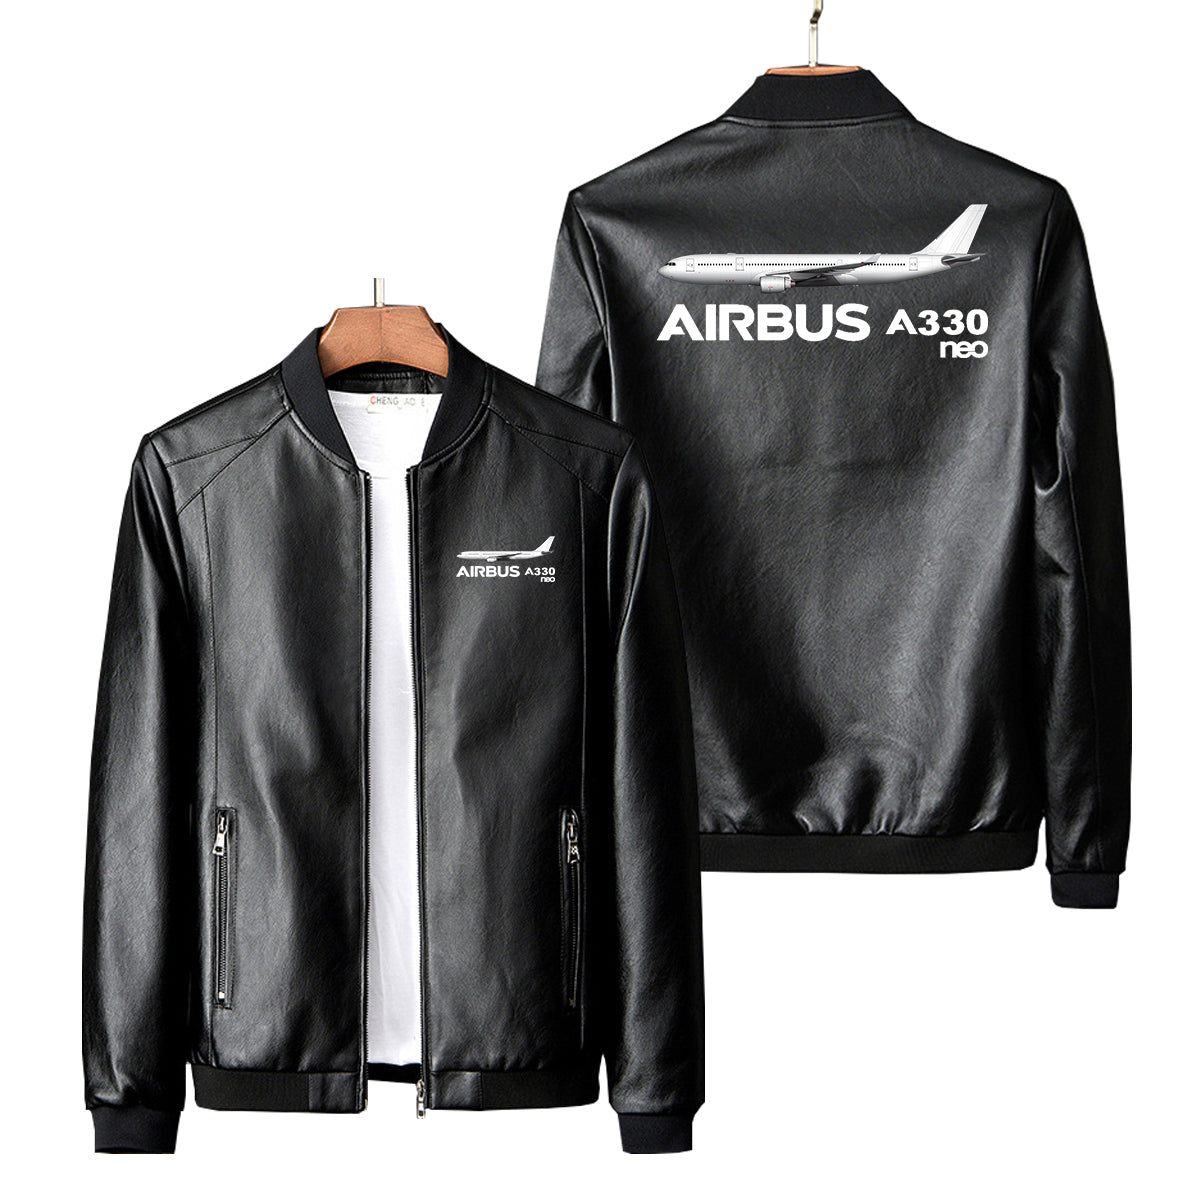 The Airbus A330neo Designed PU Leather Jackets